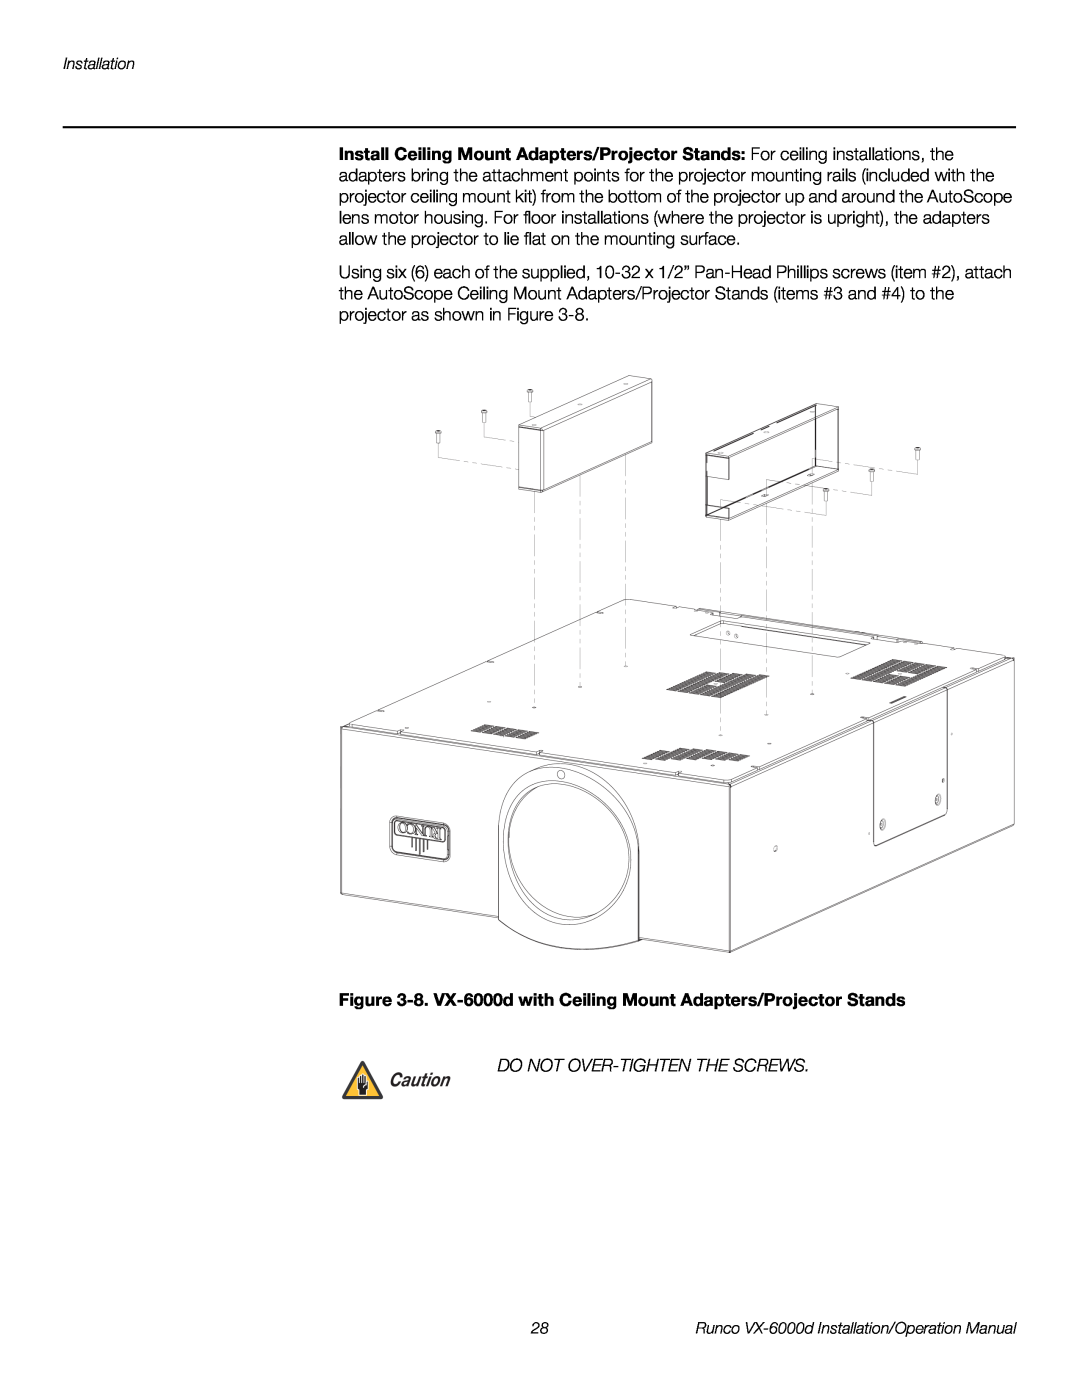 Runco VX-6000D operation manual 8. VX-6000d with Ceiling Mount Adapters/Projector Stands, Do Not Over-Tighten The Screws 